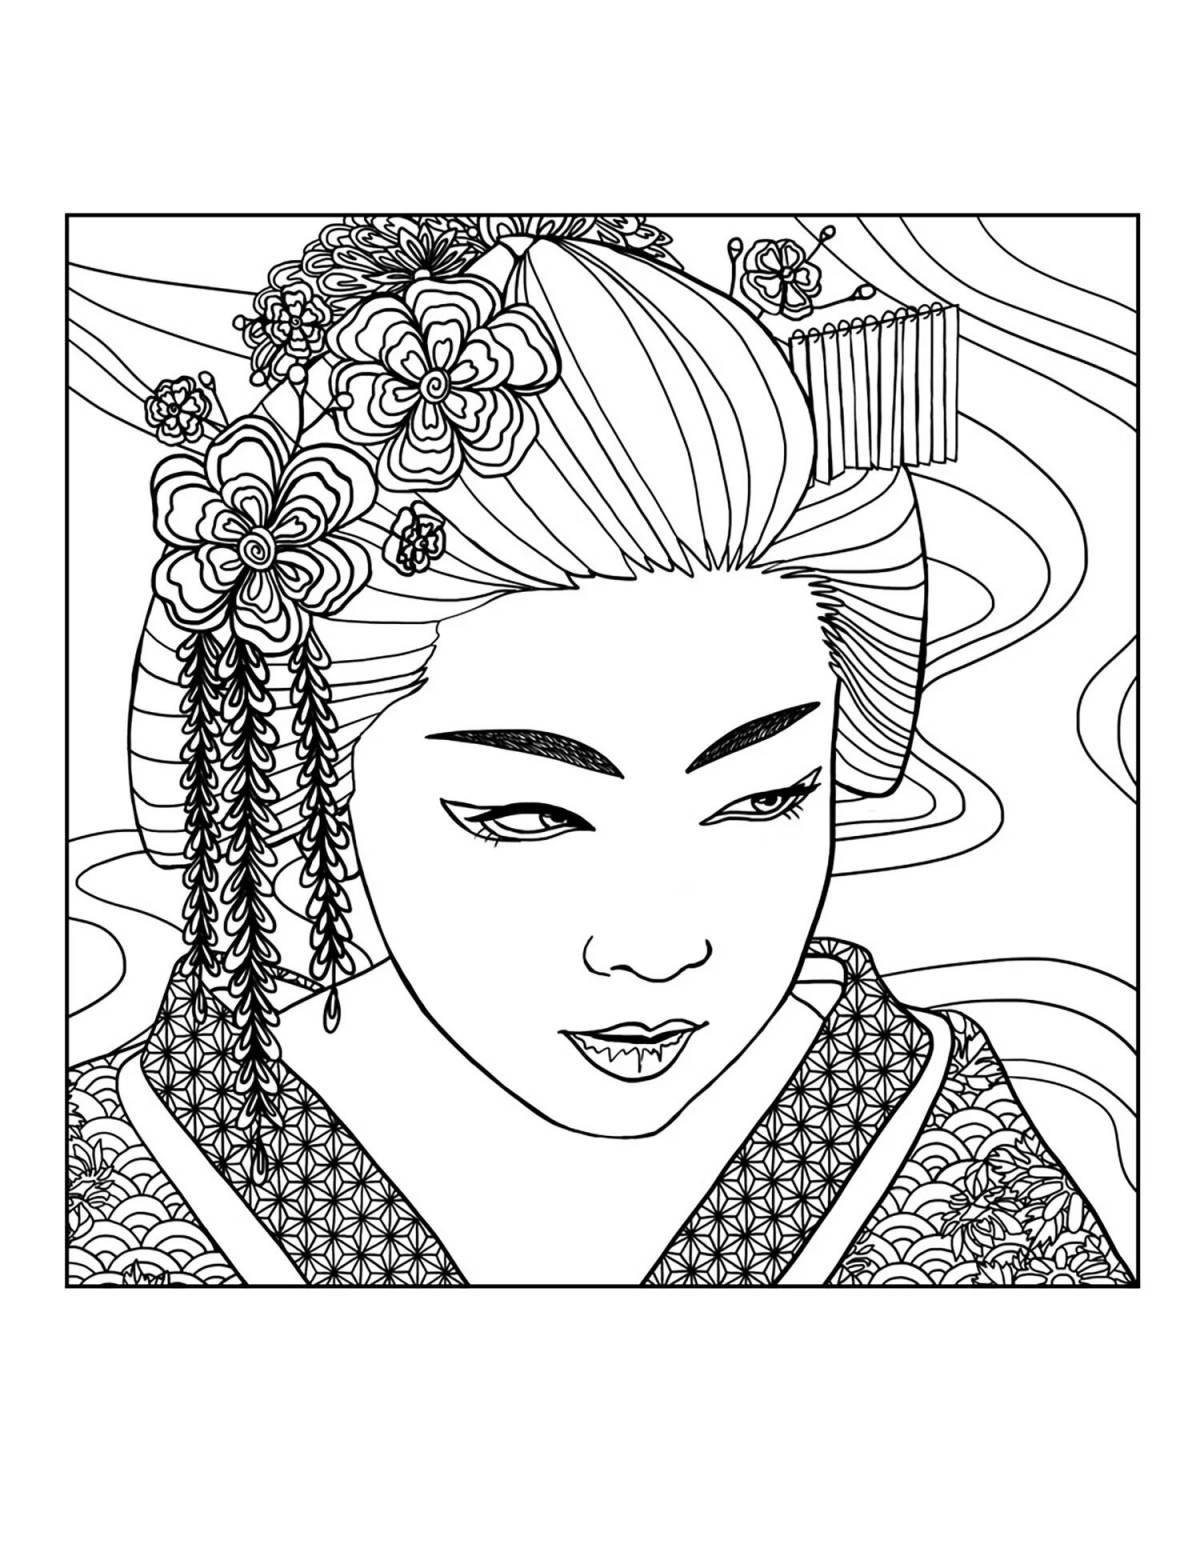 Mysterious geisha coloring page